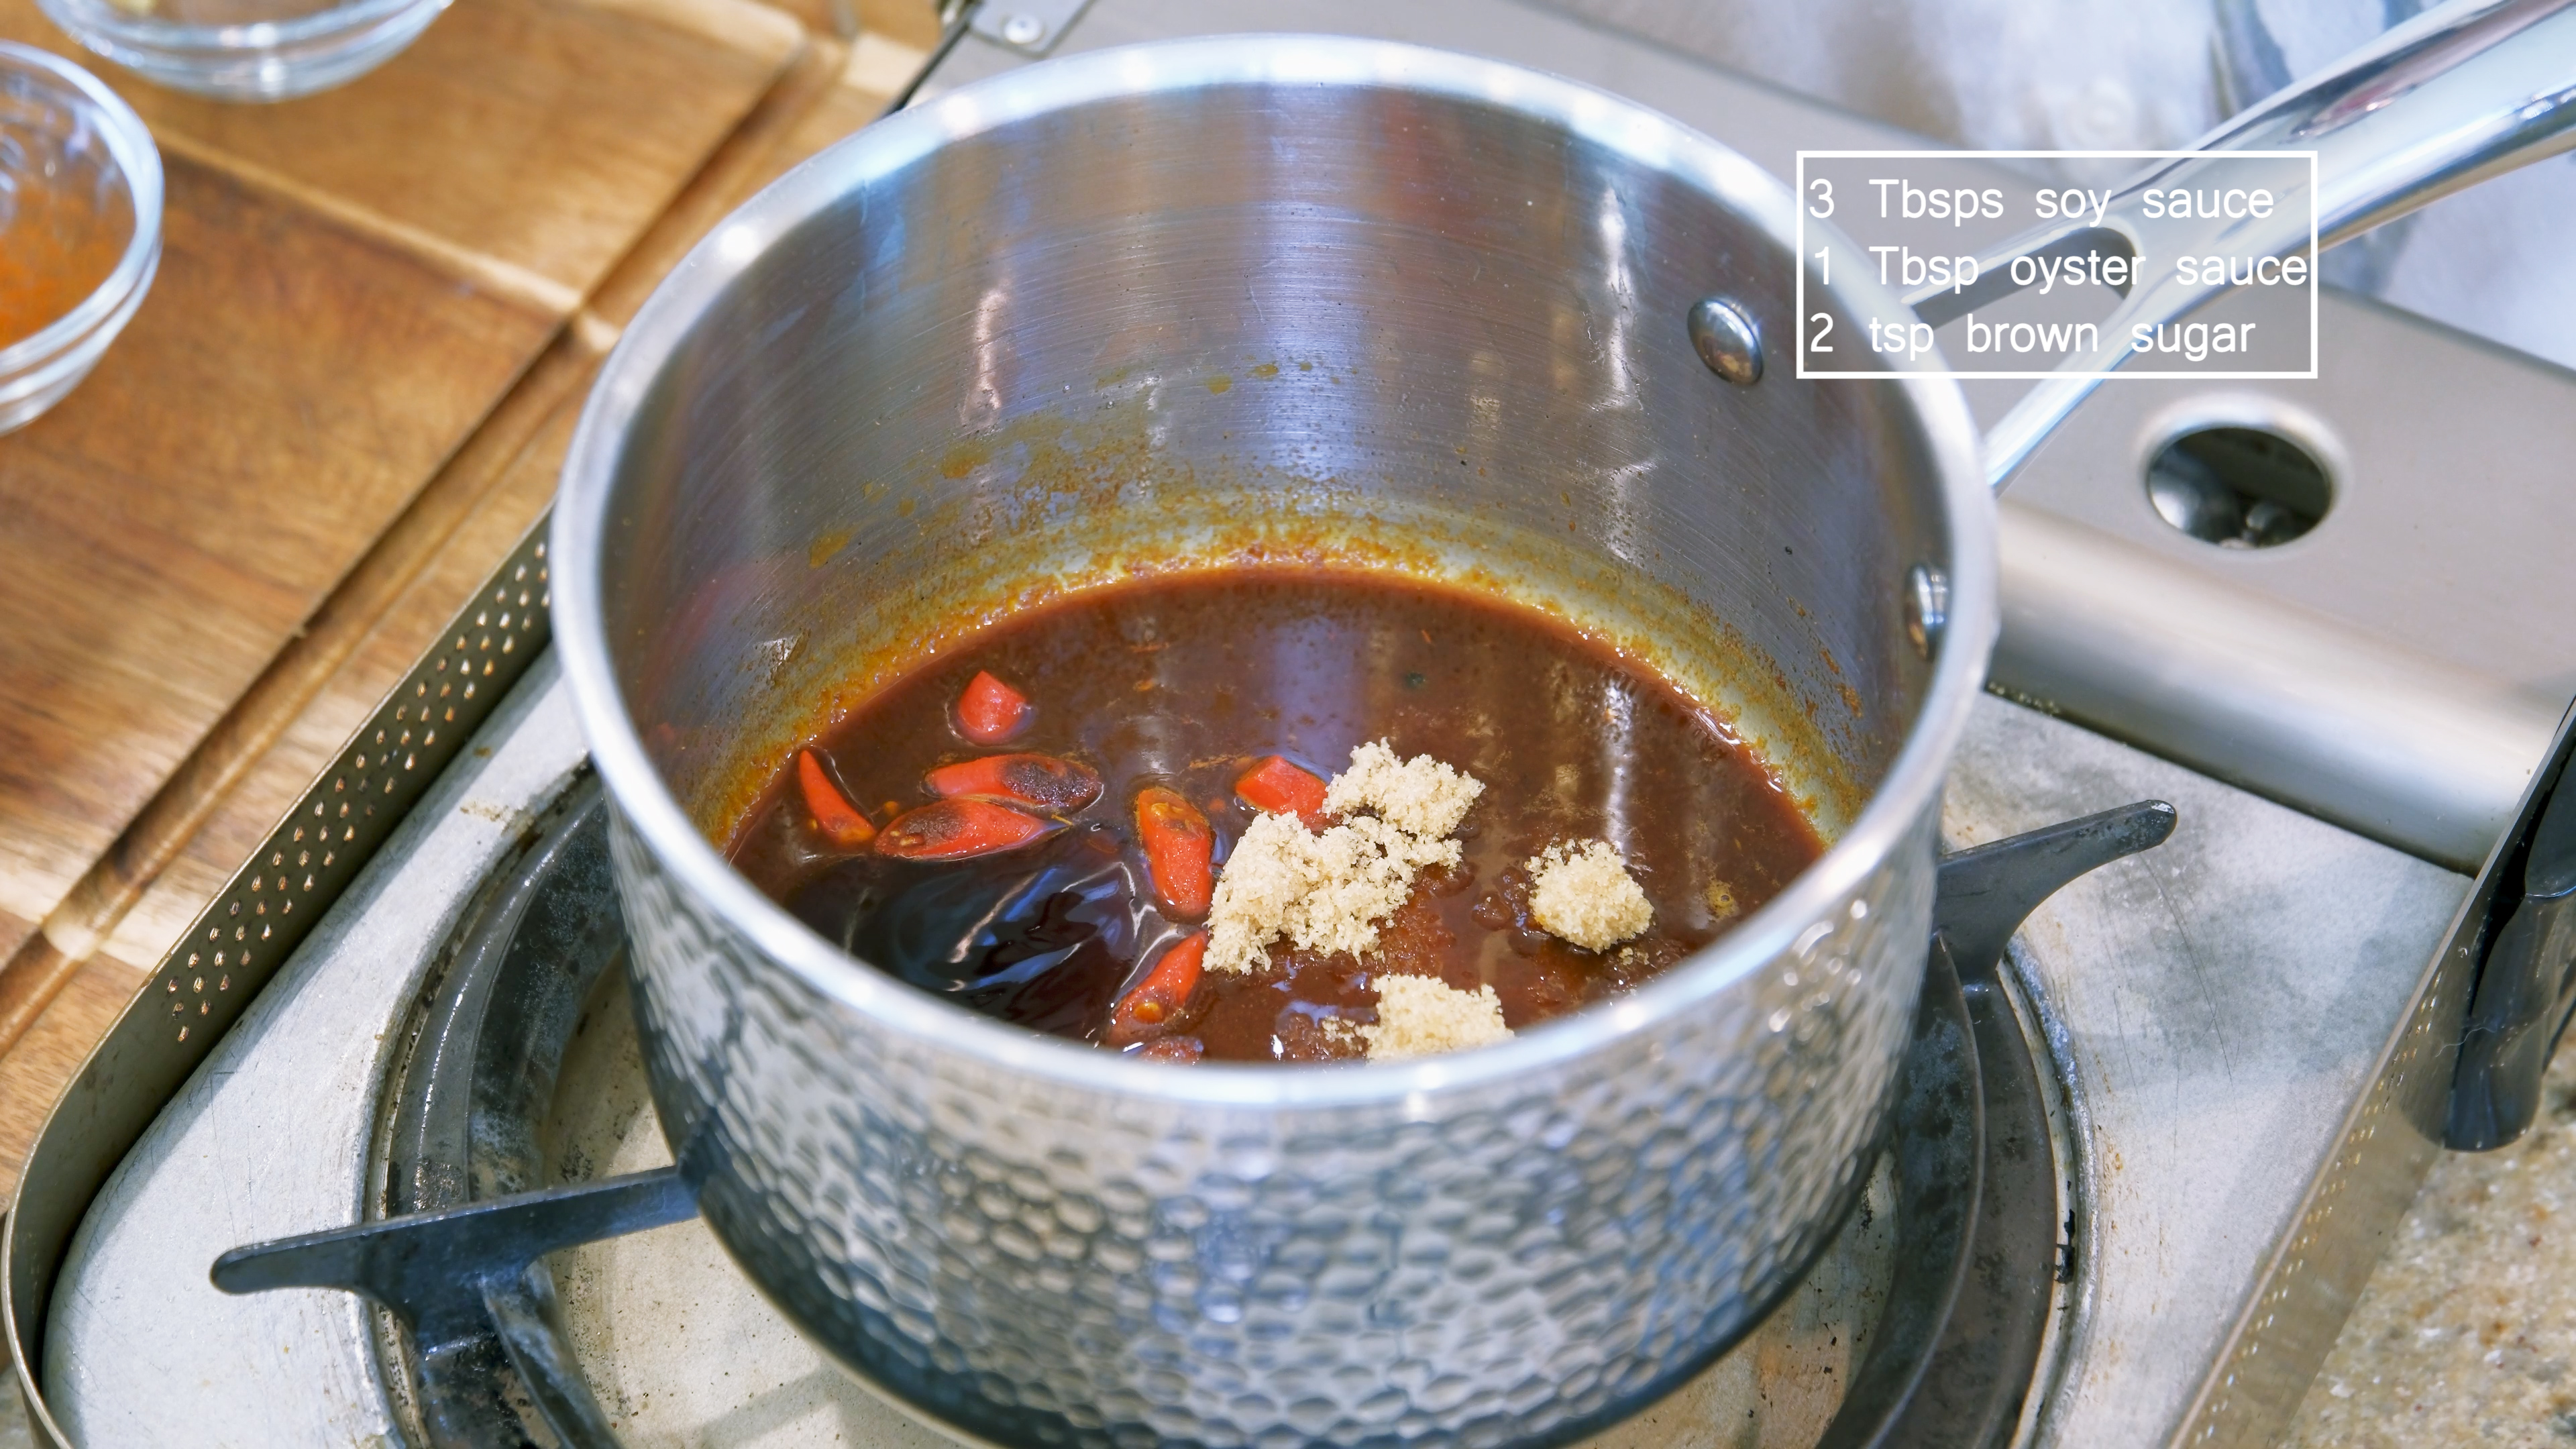 Image of Turn off the heat and add 3 Tbsp of soy sauce, 1 Tbsp of...